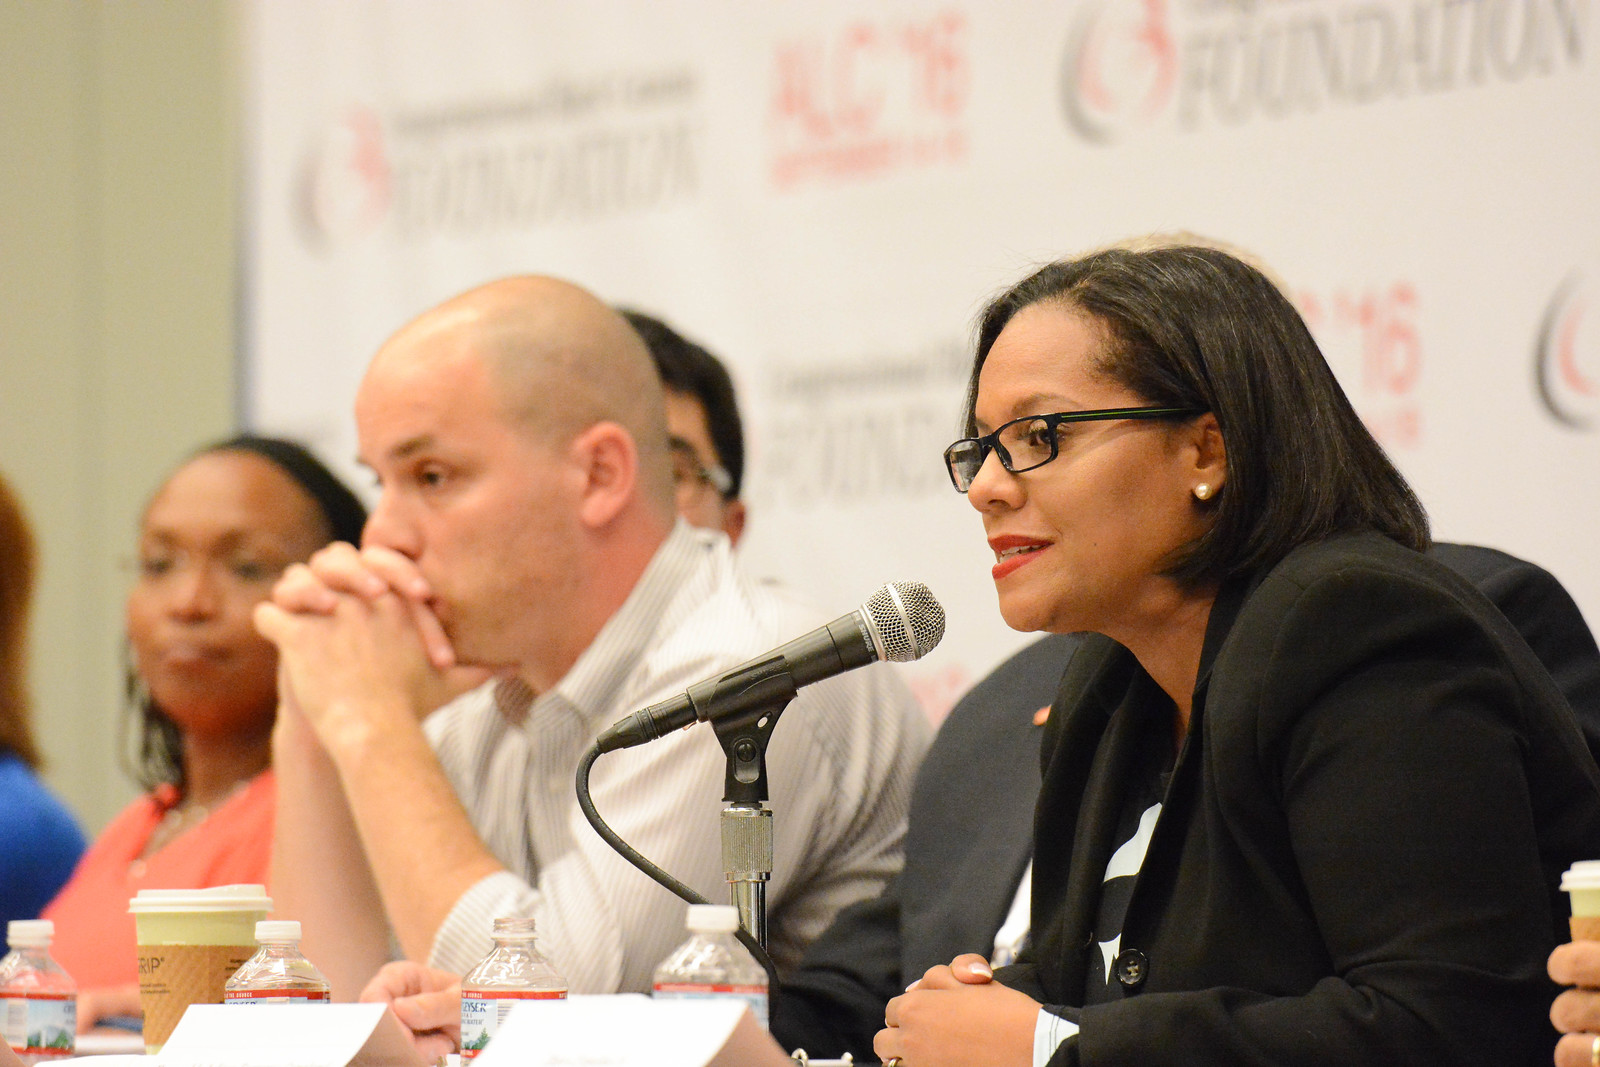 CBCF Annual Legislative Conference Panel - Justice Not Profits: Exploration of our Failed For-Profit Prison Industry